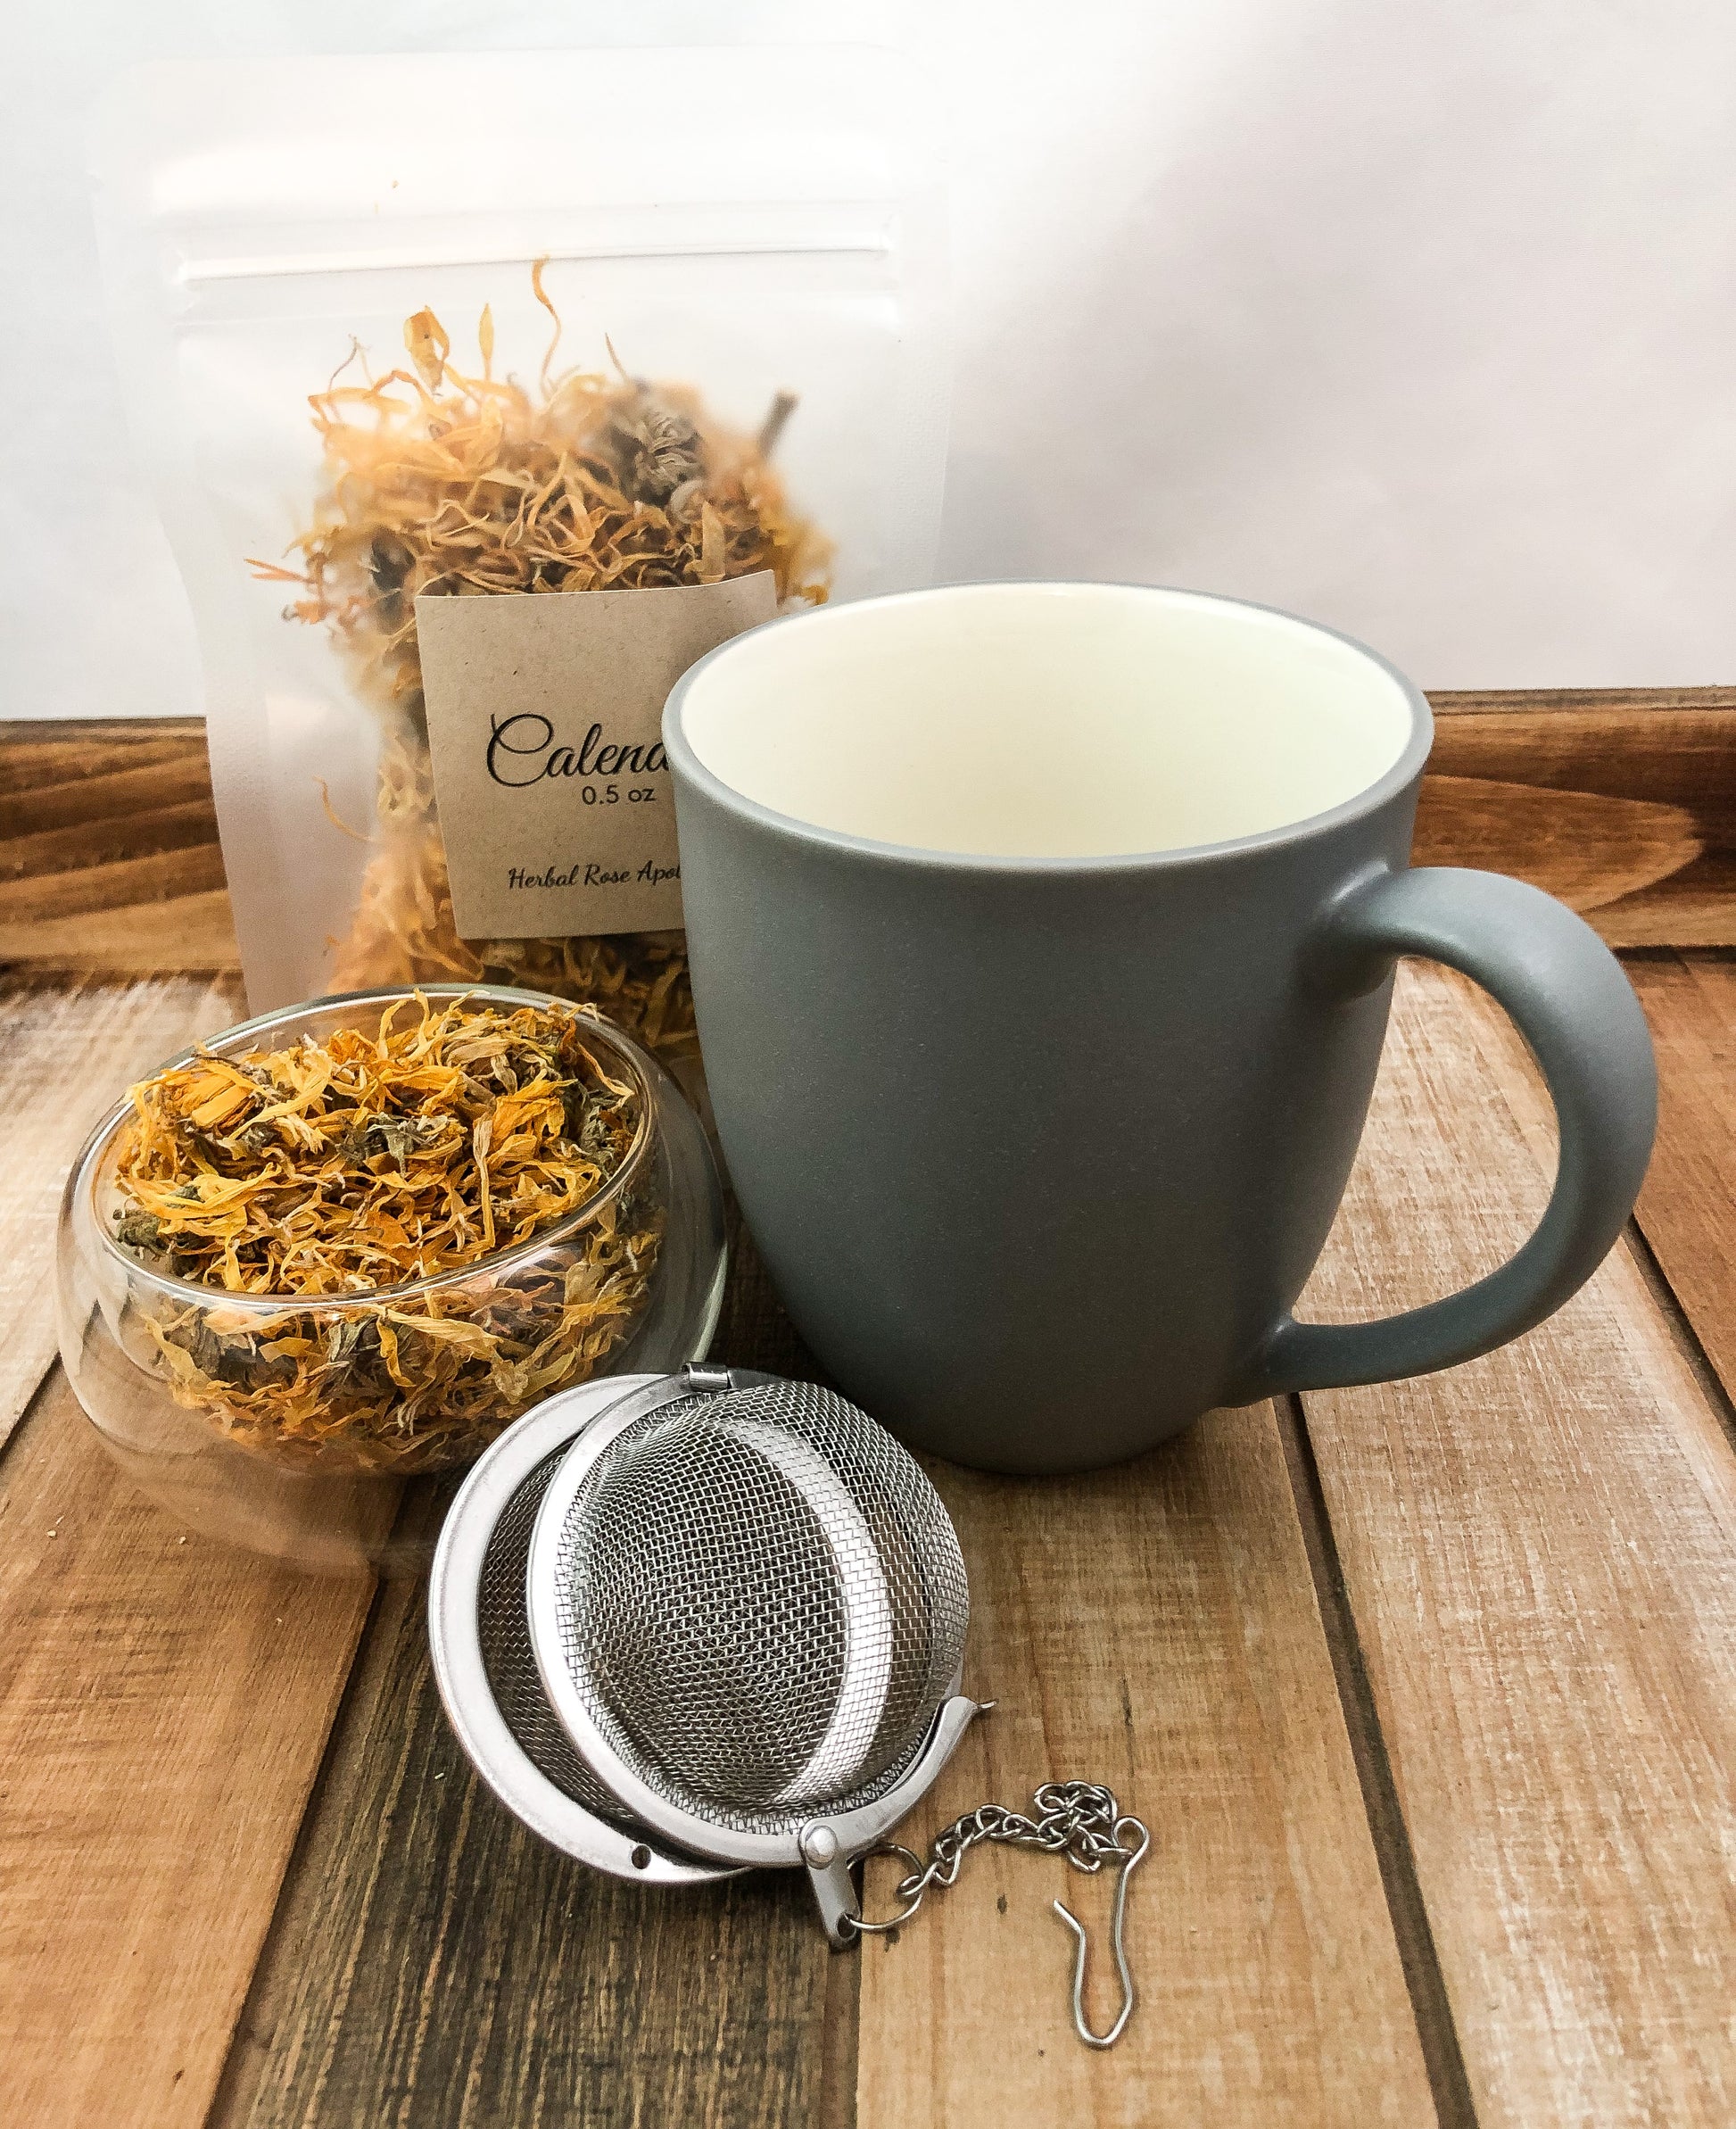 image with a clear small bowl of dried calendula flowers and mesh strainer in the forefront, a mug to the right of the image grey on the outside and white on the inside, and a bag of 0.5oz dried calendula in a clear plastic bag behind the mug, with a whitish background and items sitting on a wooden table